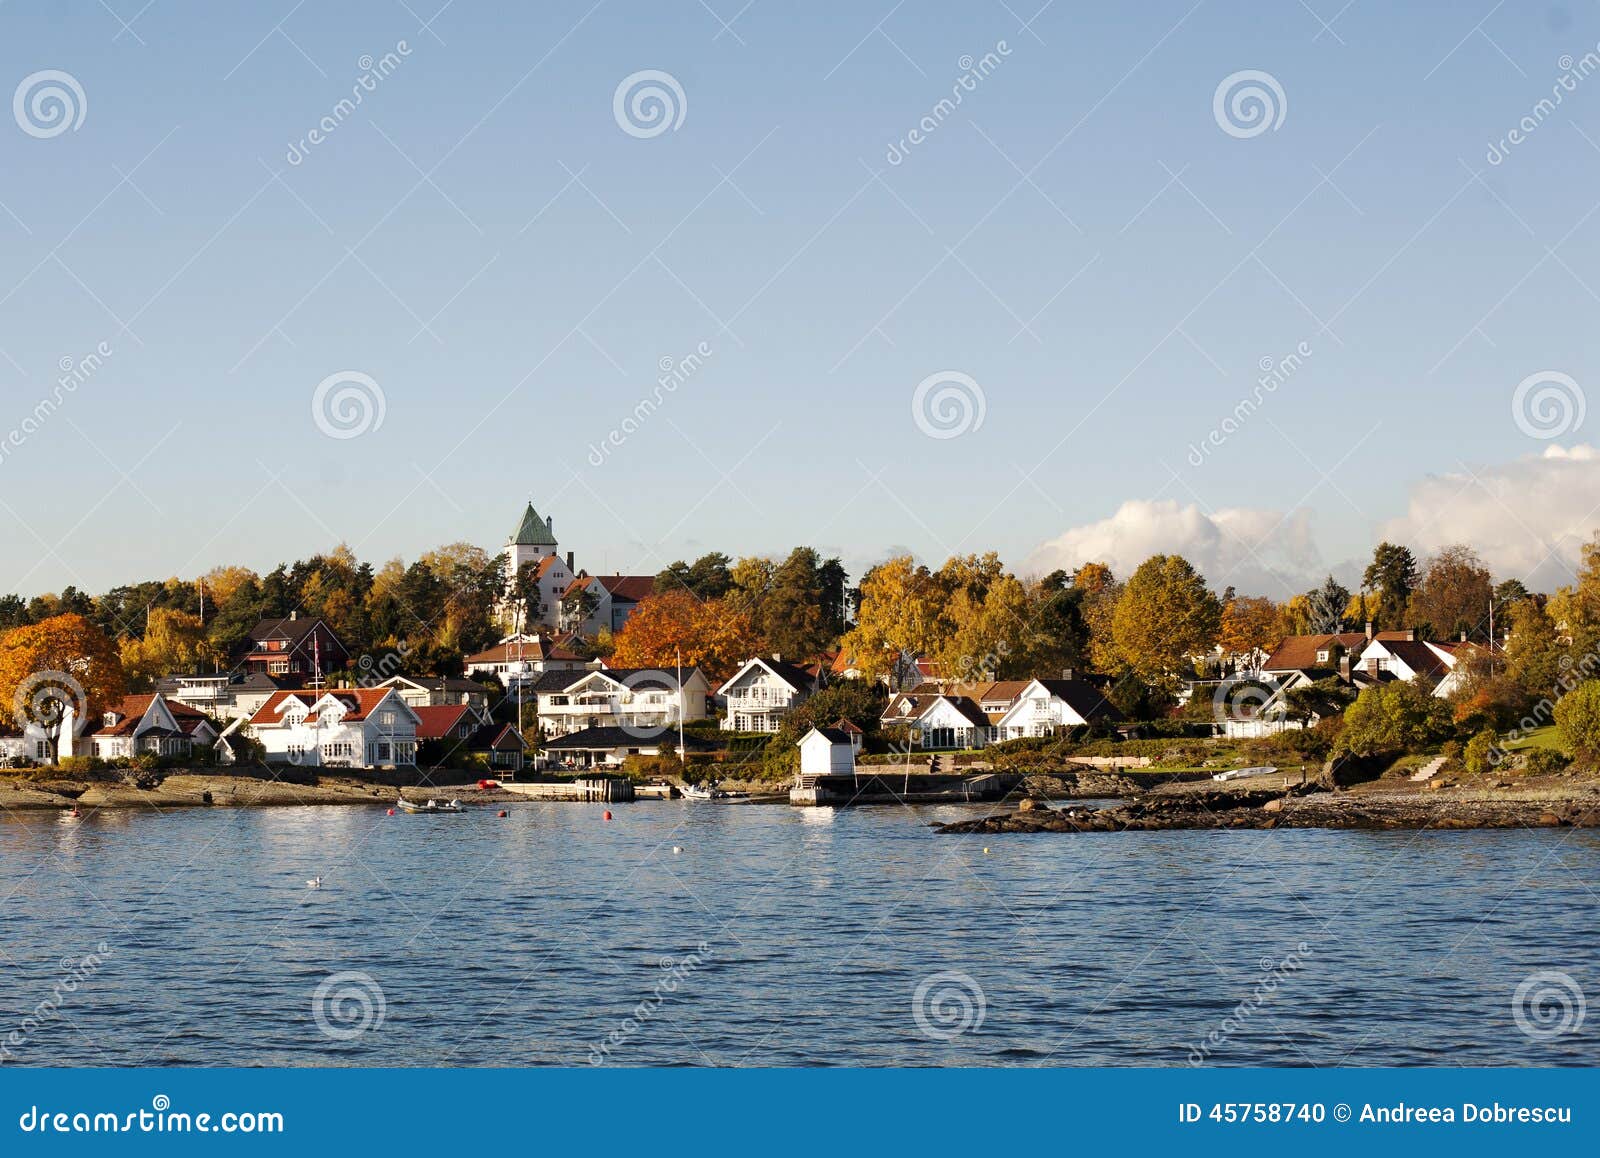 houses on an island in the oslo fjord